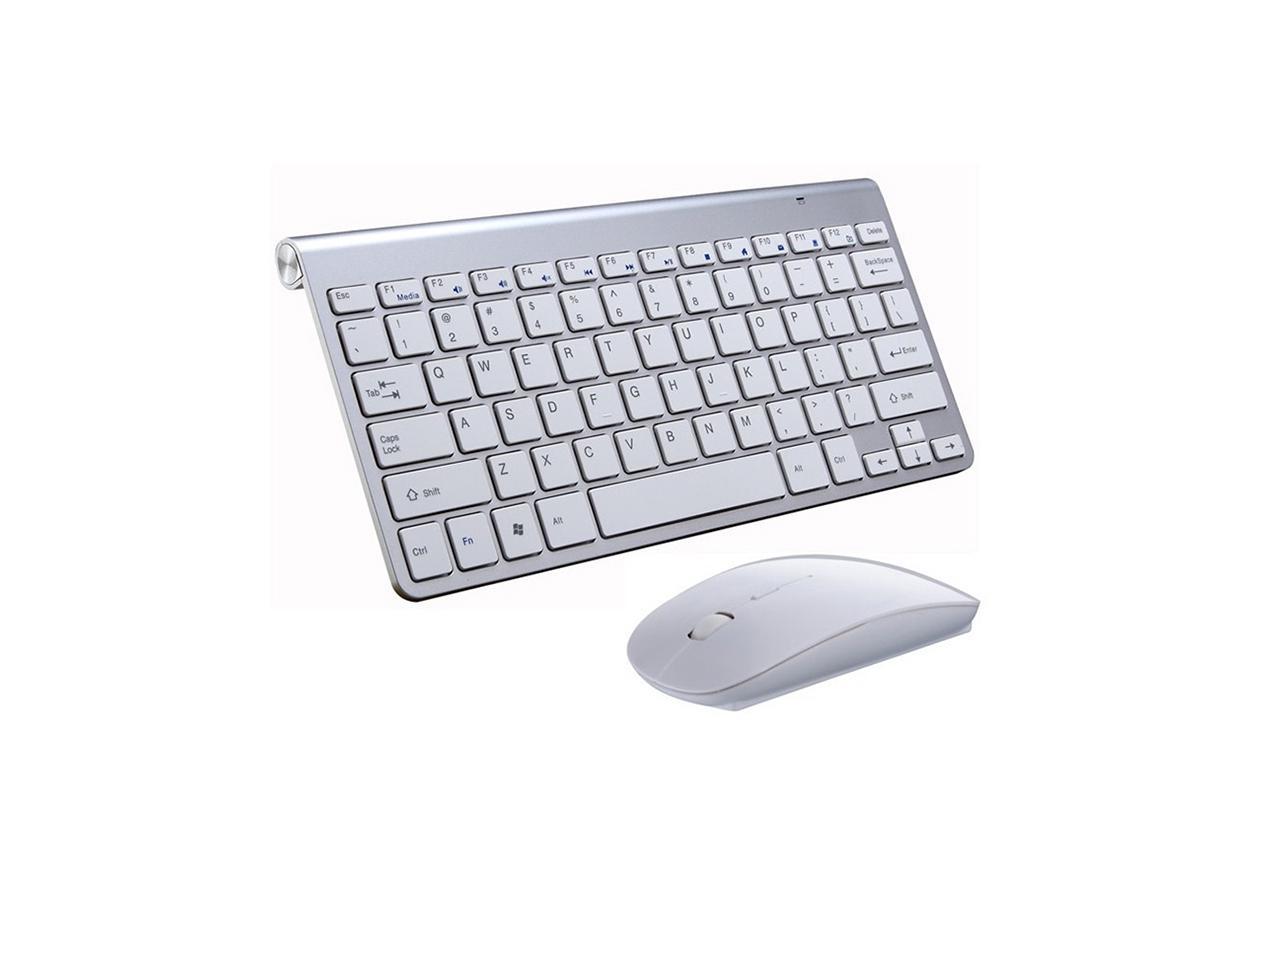 HF-KWM01: 2.4GHz Ultra-Thin Wireless 2.4G keyboard and Mouse Combo